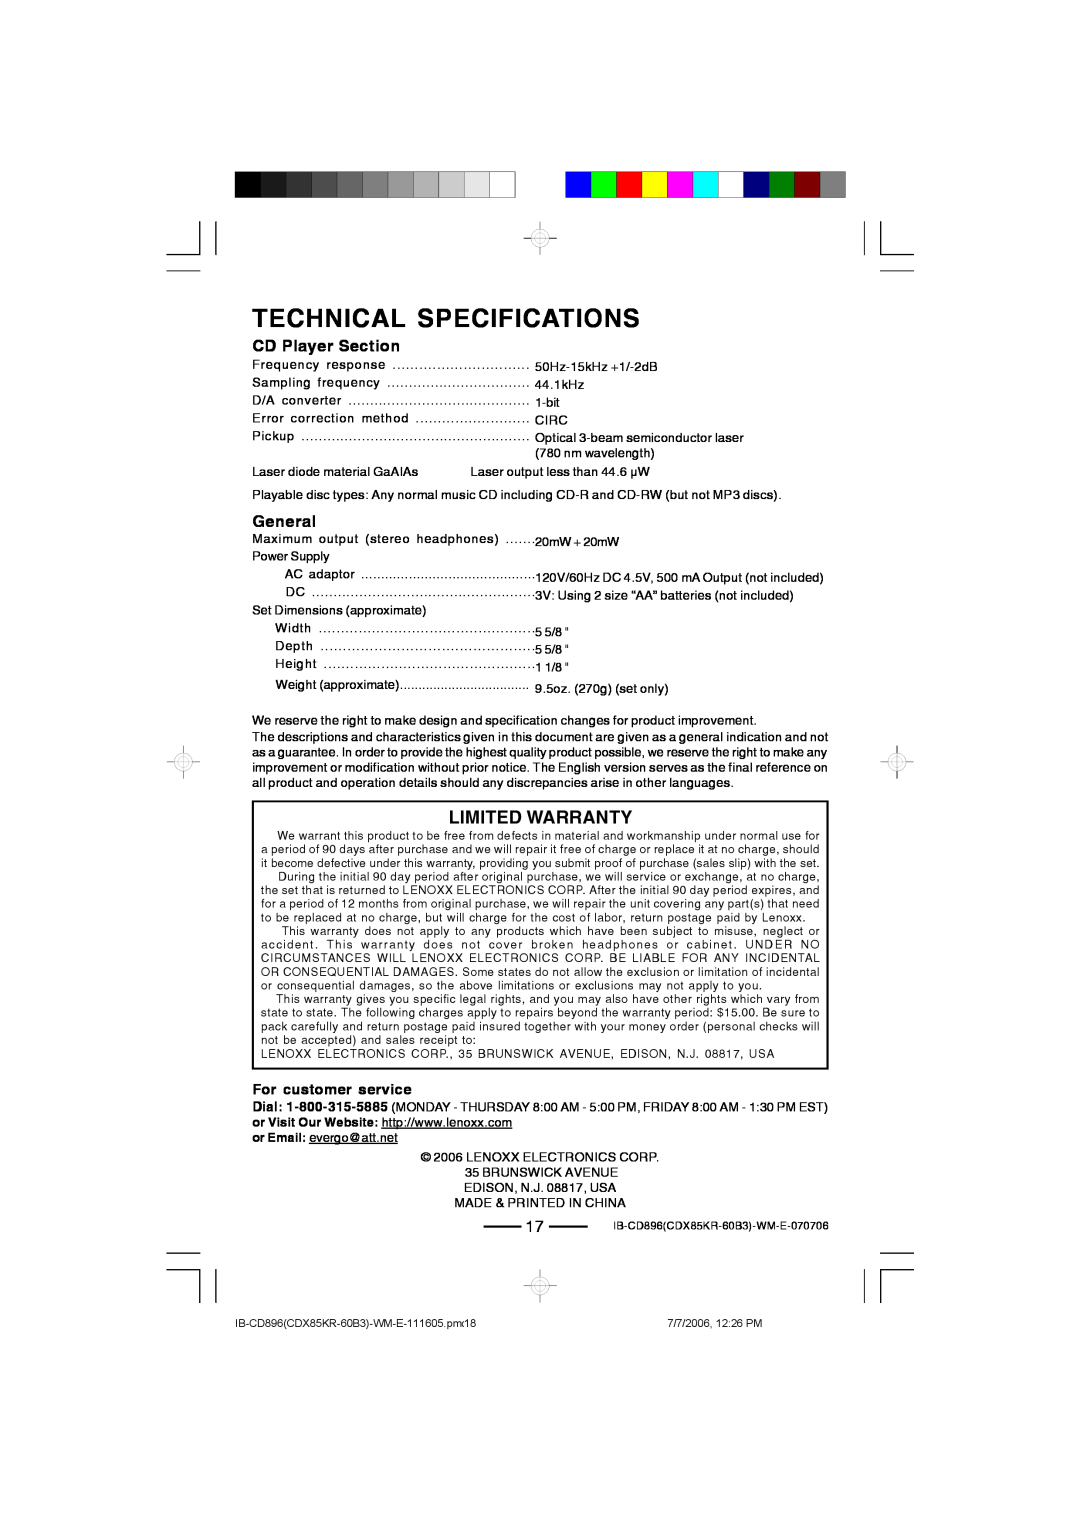 Lenoxx Electronics CD-896 operating instructions Technical Specifications, CD Player Section, General, For customer service 